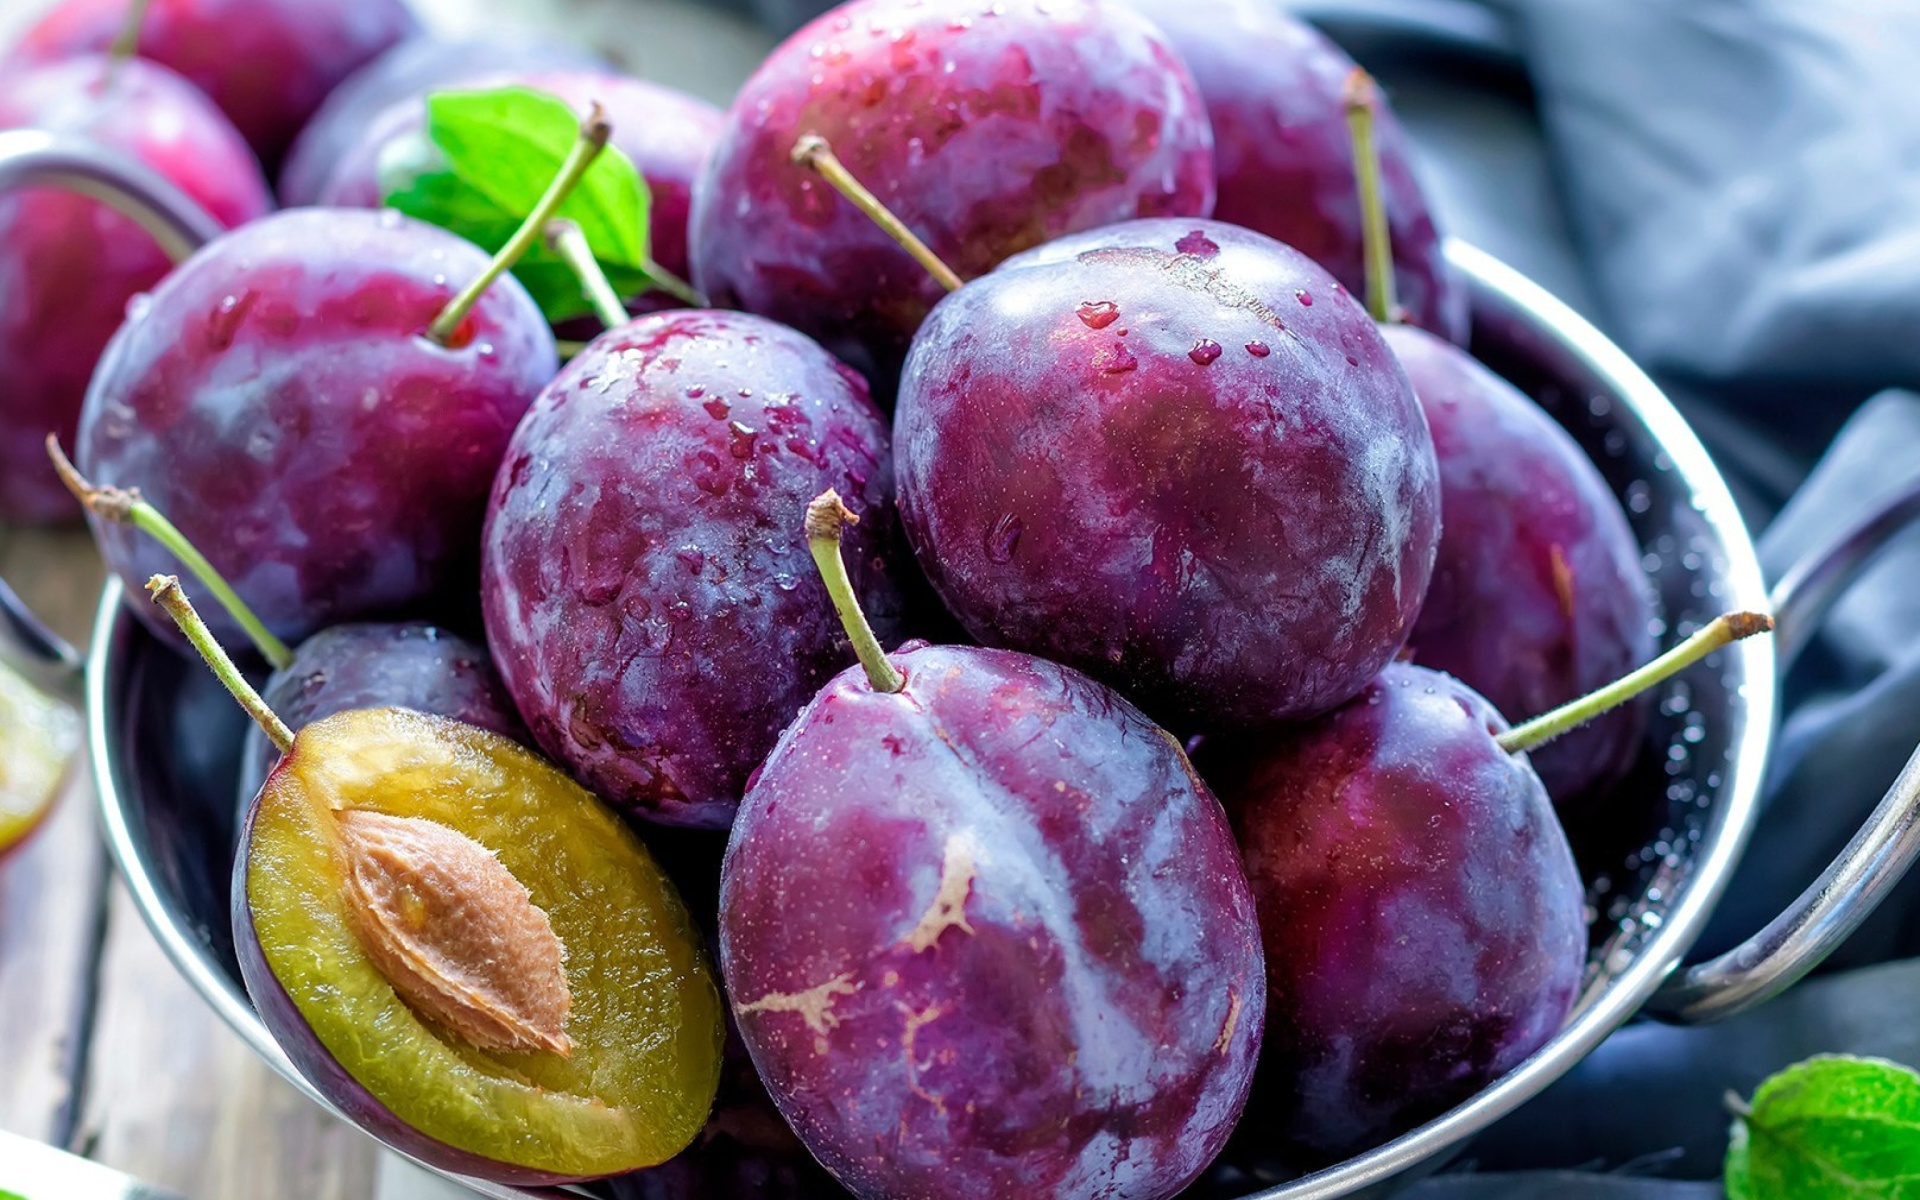 Plums with Vitamins wallpaper 1920x1200